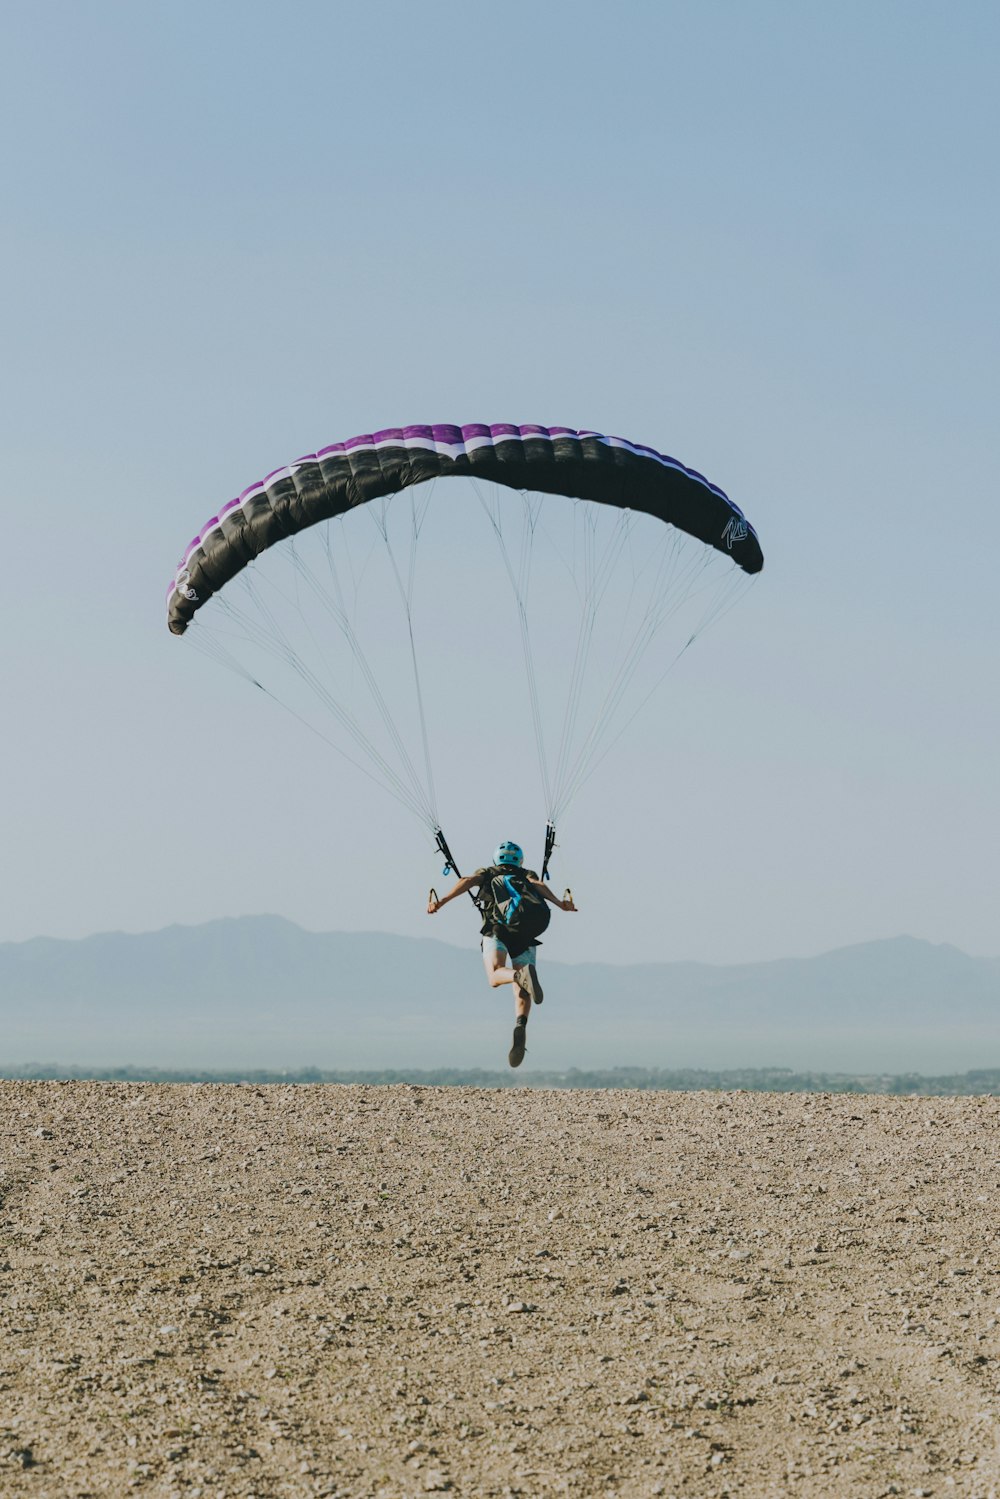 man in blue shirt and black shorts riding on blue and white parachute